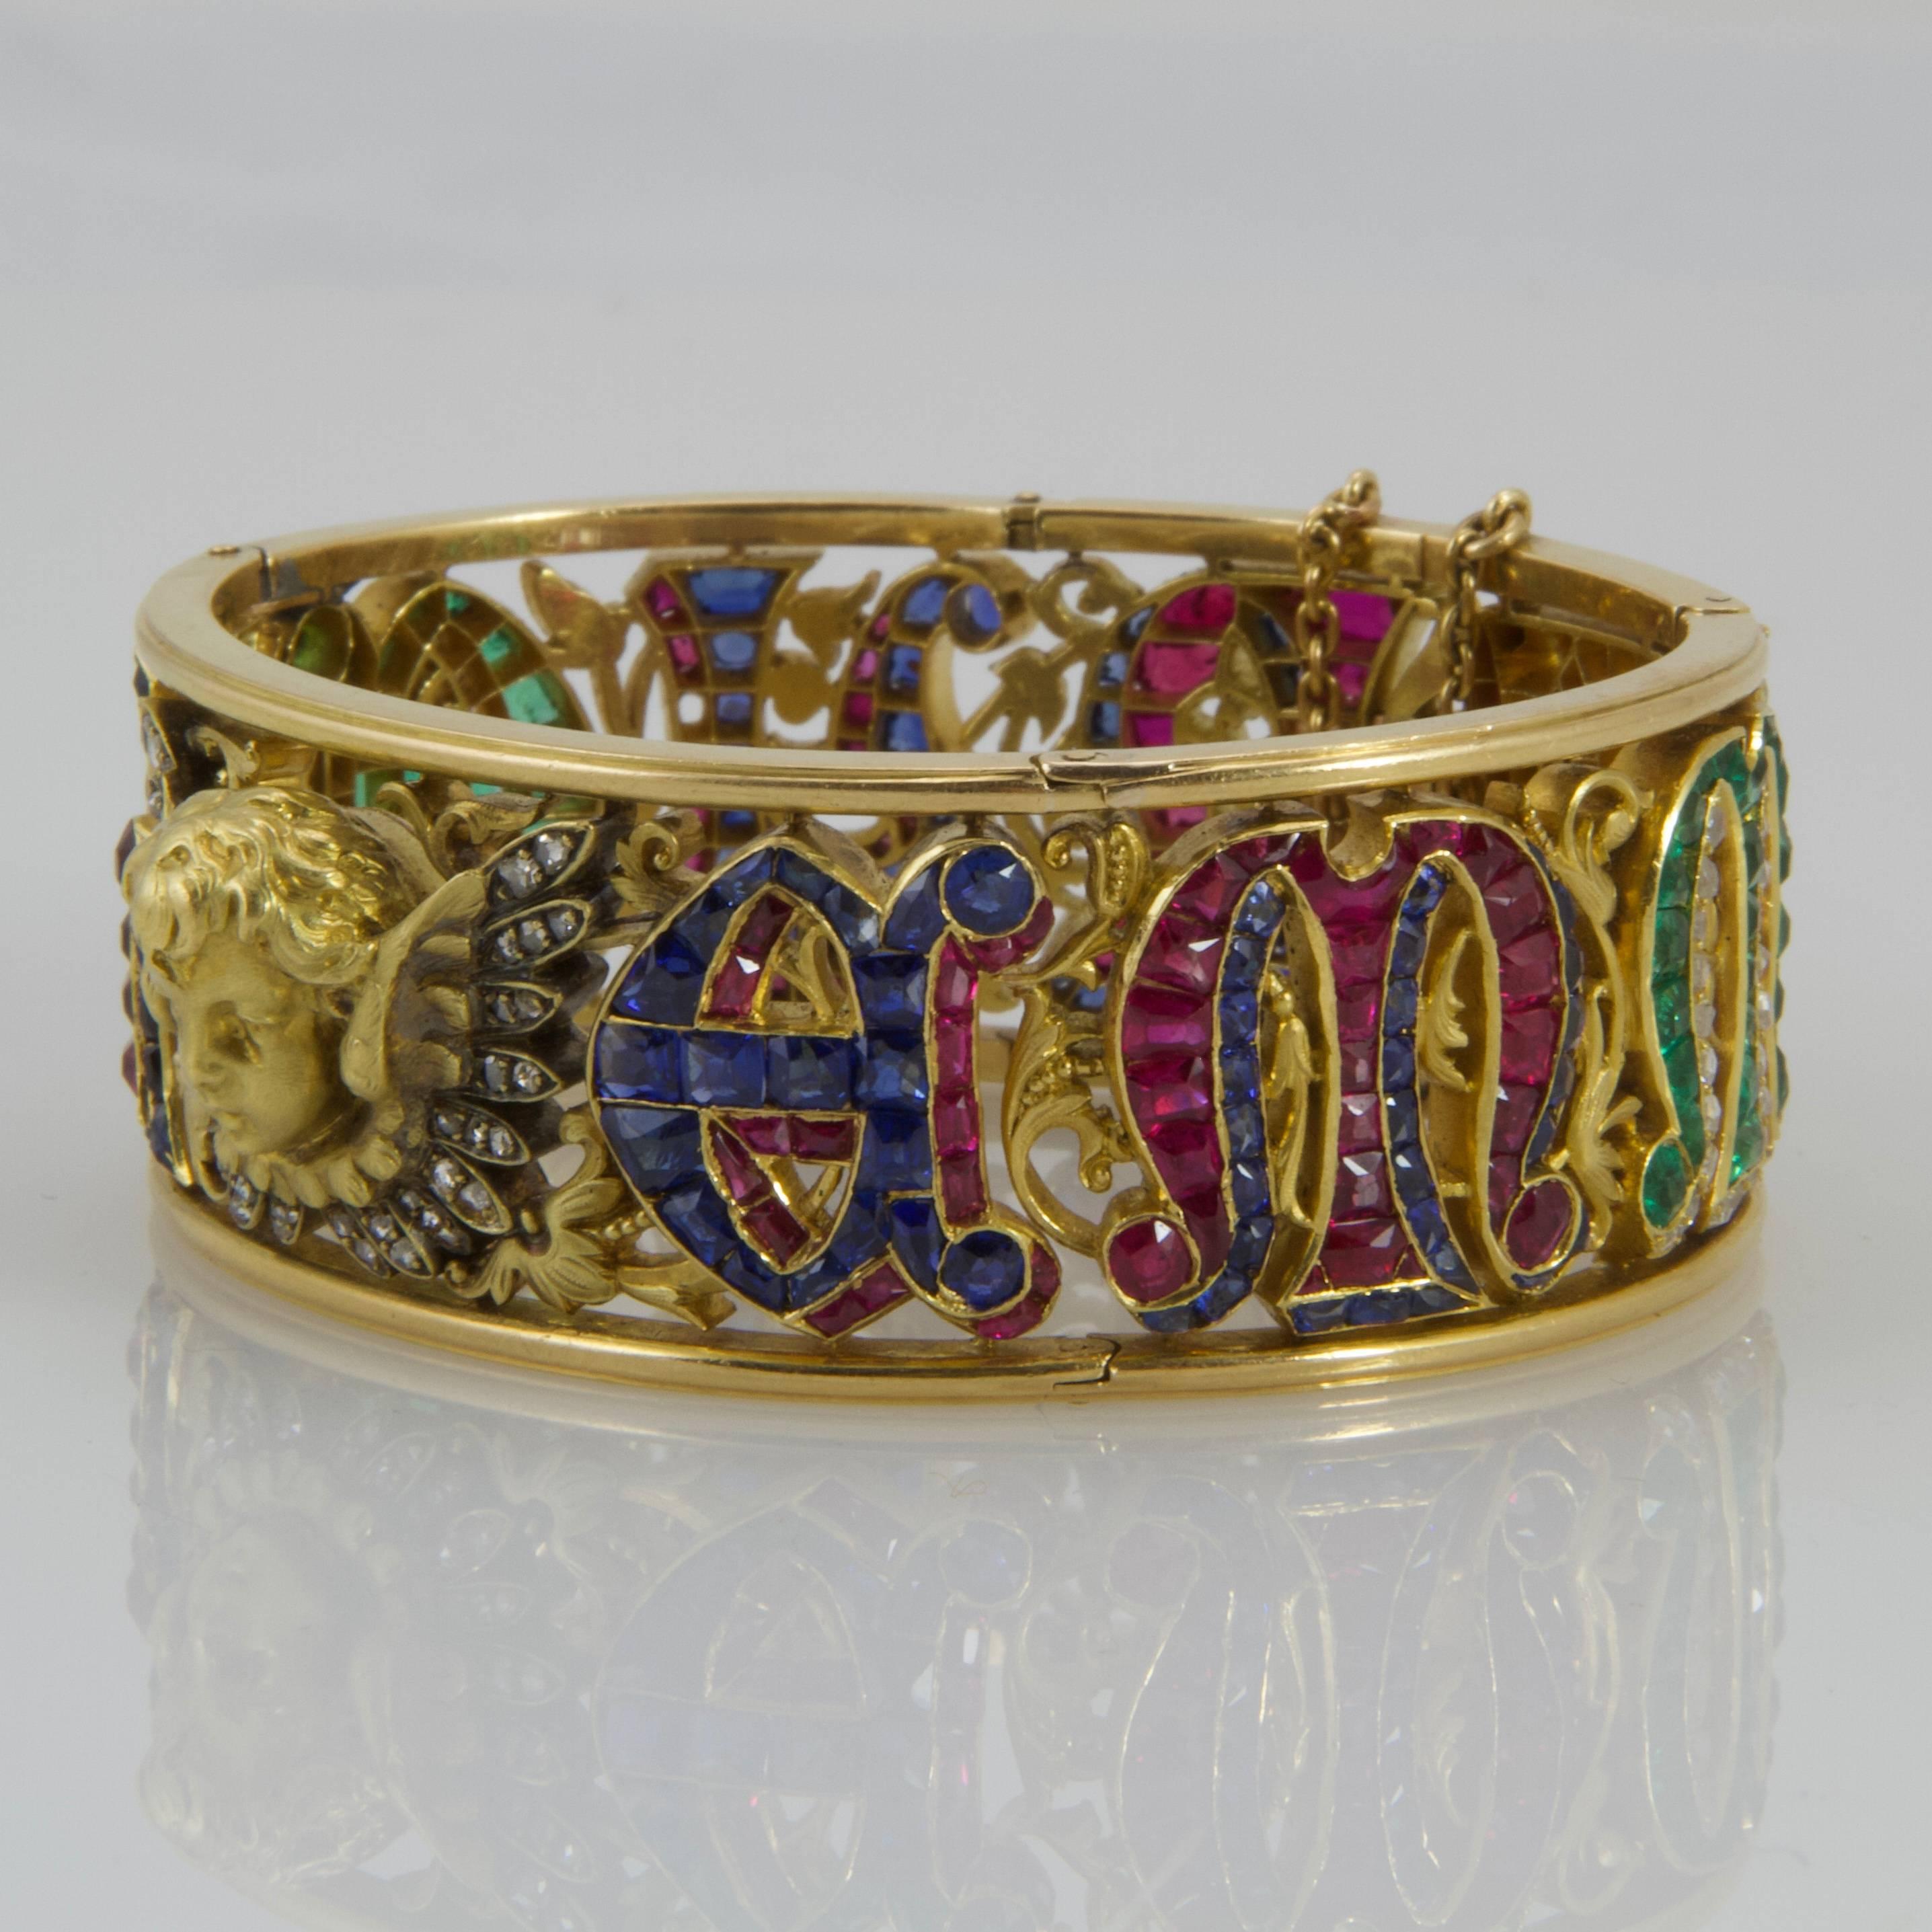 18kt yellow mat gold chiseled foliage pattern bangle presenting on the center a face of angel with rose cut diamond wings. Overall the bangle, the letter of Emmanuel are displayed in calibre precious stones, rubies shaded by sapphires, and vice